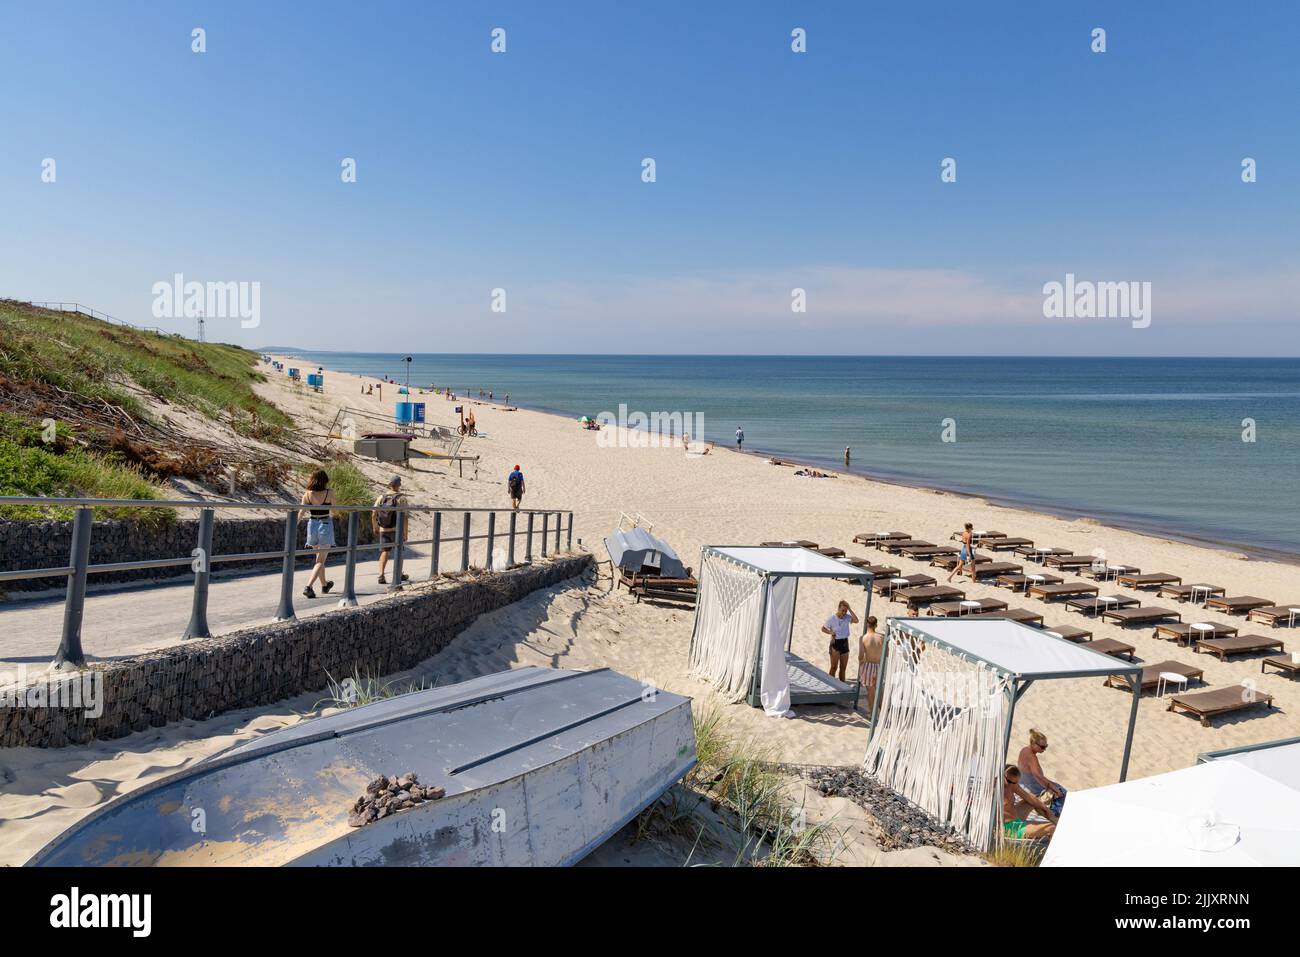 Lithuania beach; people enjoying the sandy beach in summer on the Baltic Sea coast on the Curonian Spit, Lithuania, Europe Stock Photo